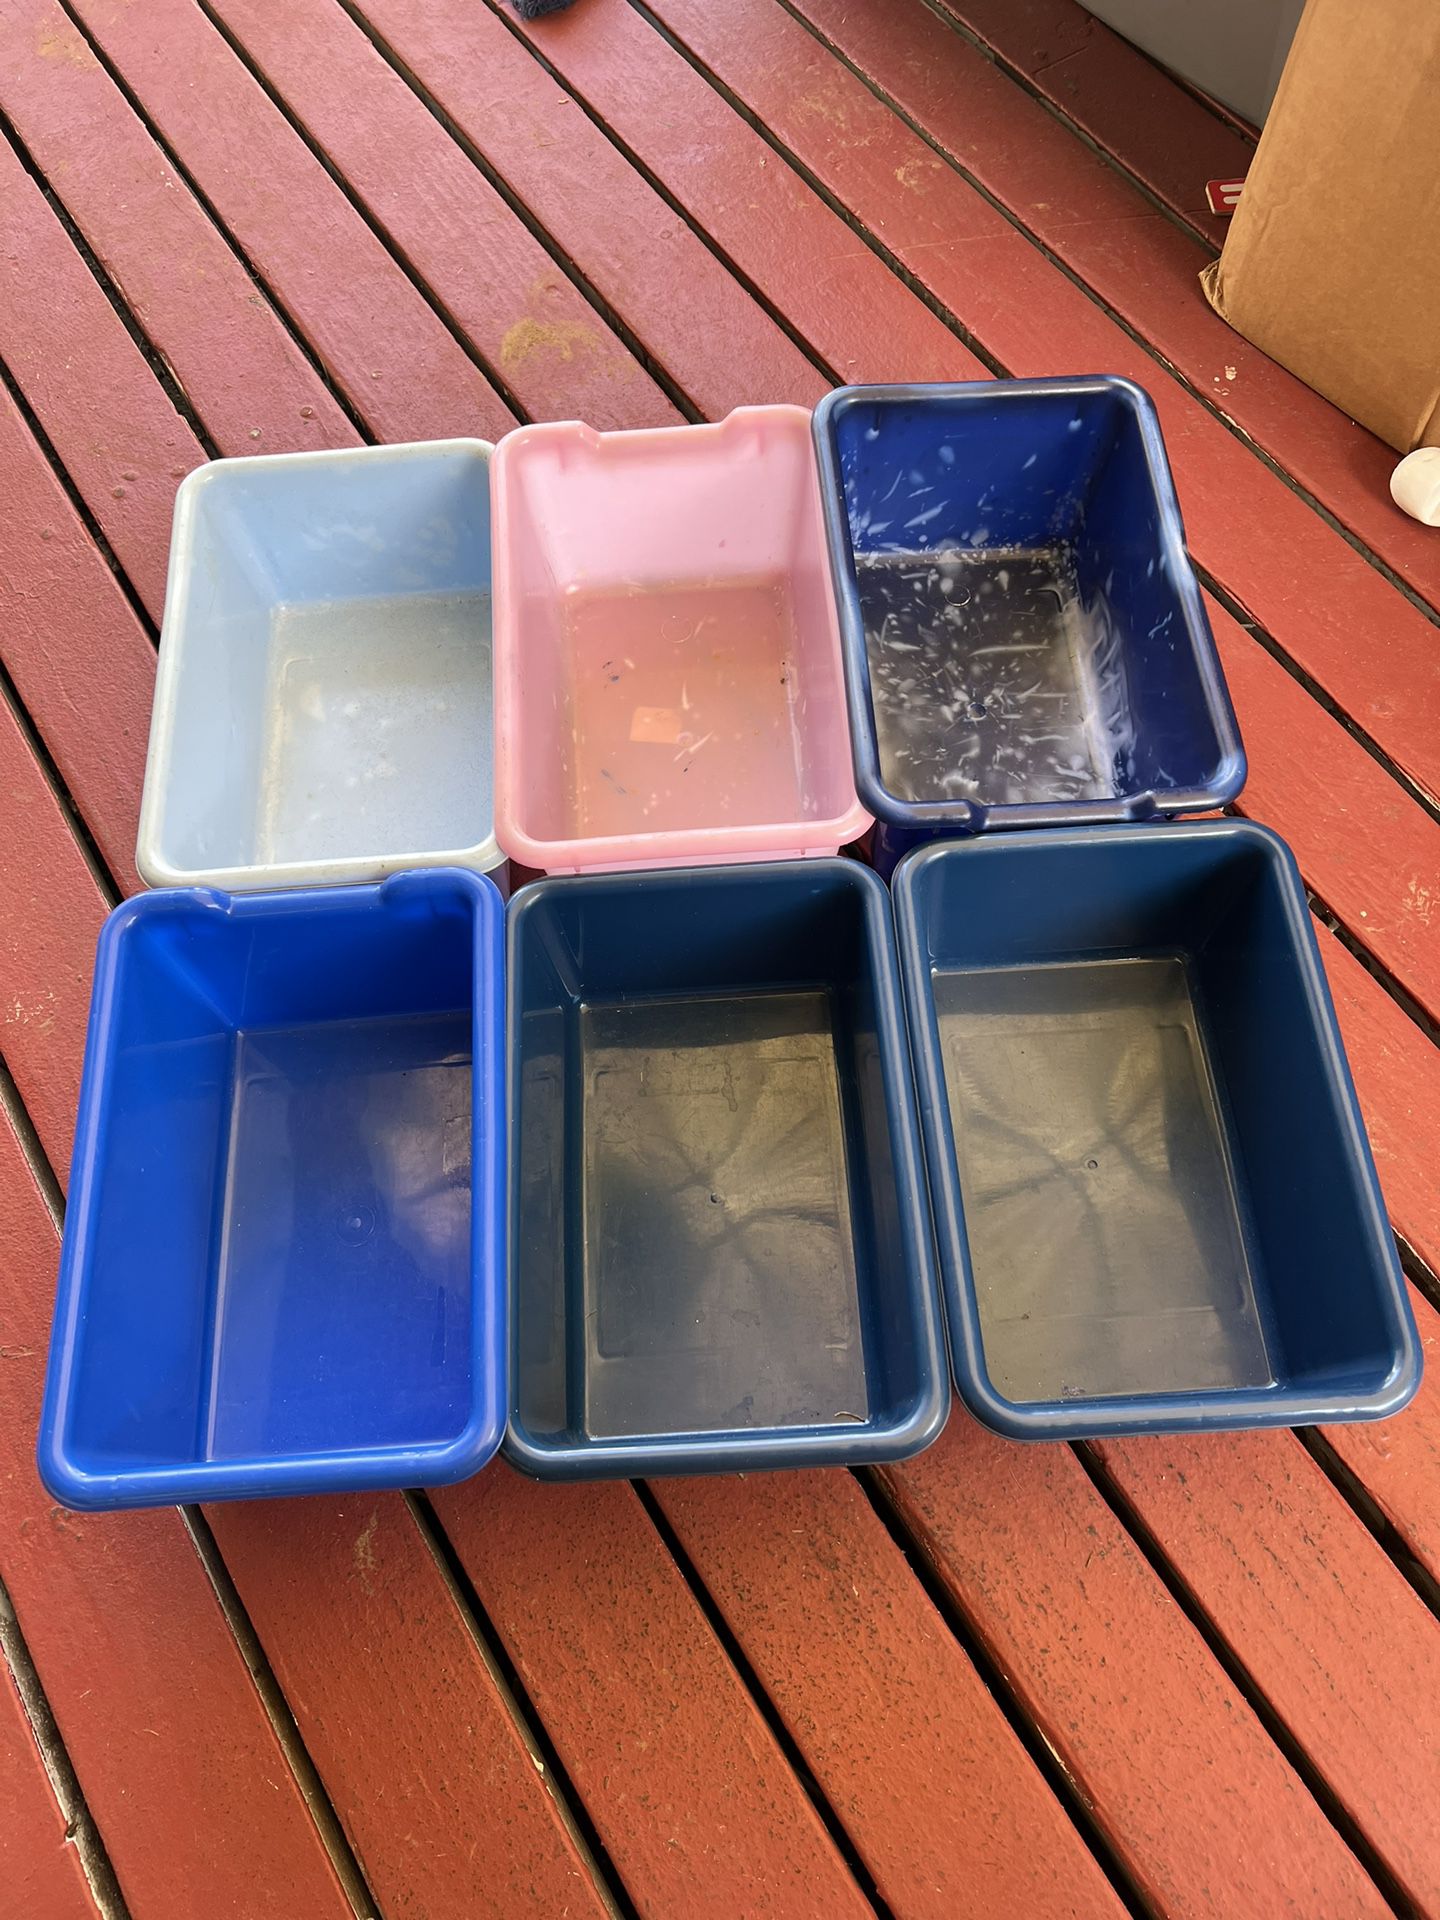 TROFAST Storage box, 6 For $10 Each For $2